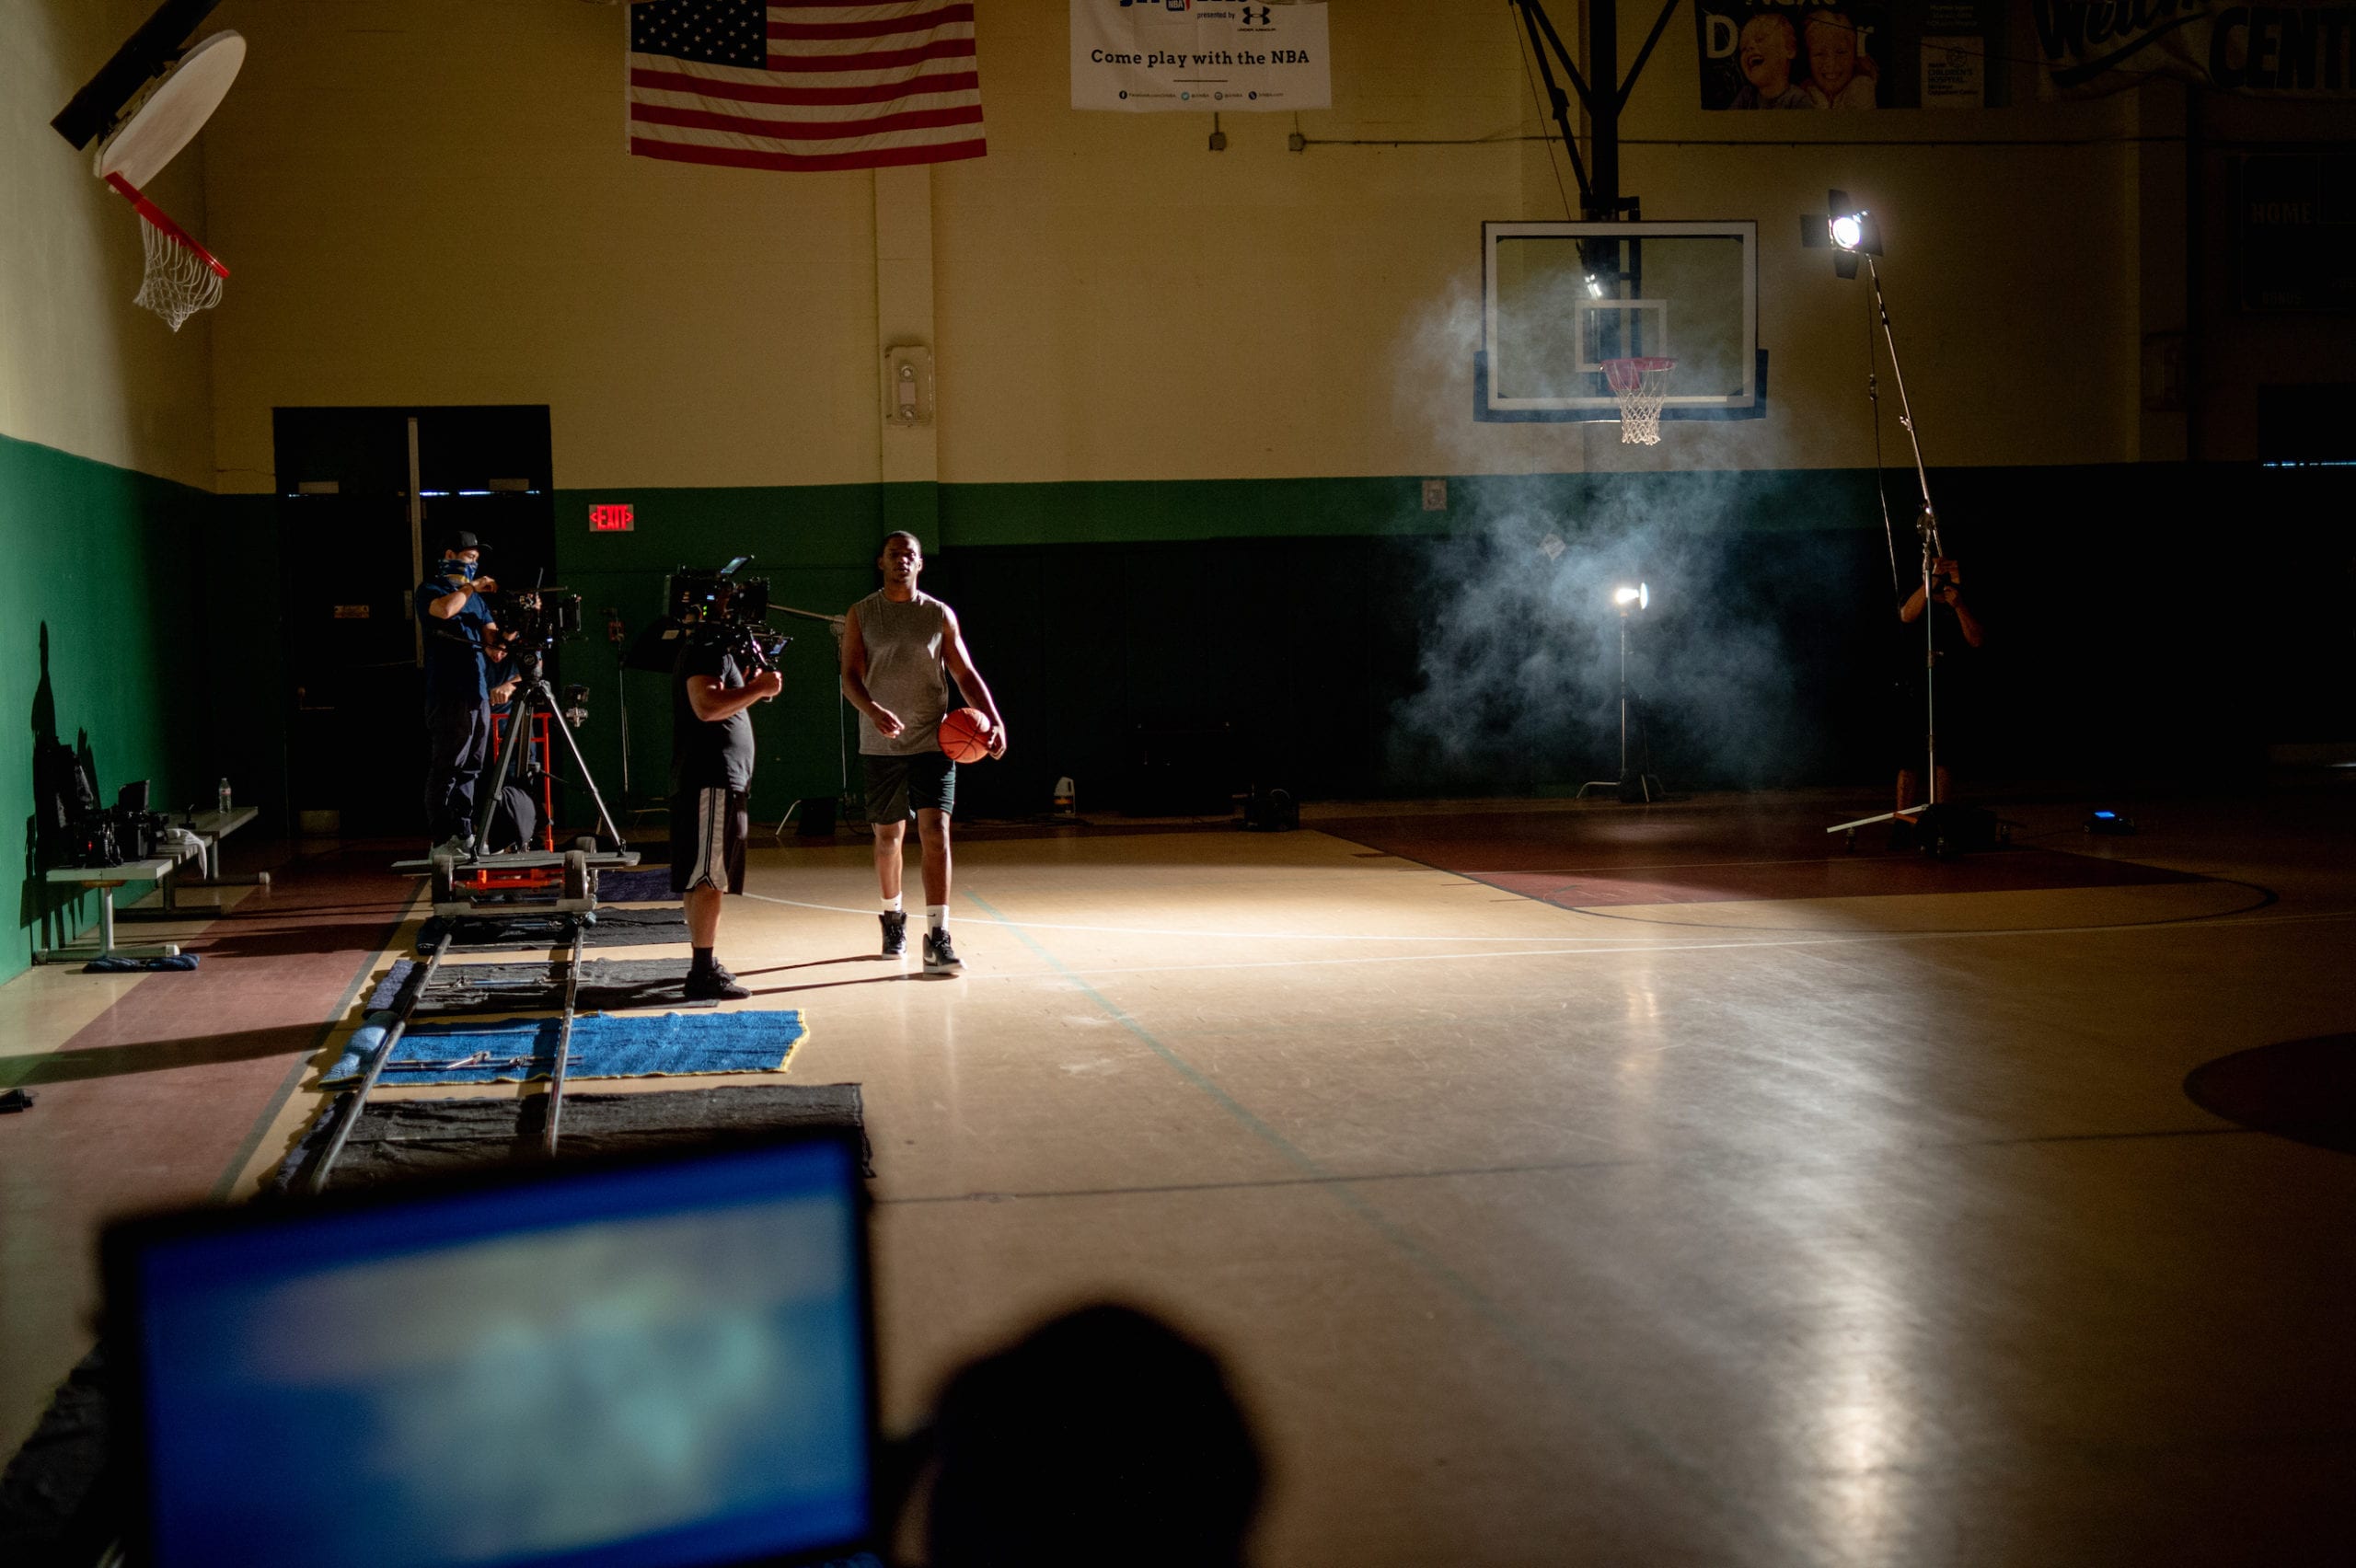 IU C&I Studios Page Nike scene being filmed on a basketball court in a gym with a basketball player holding a ball walking on the court surrounded by a film crew